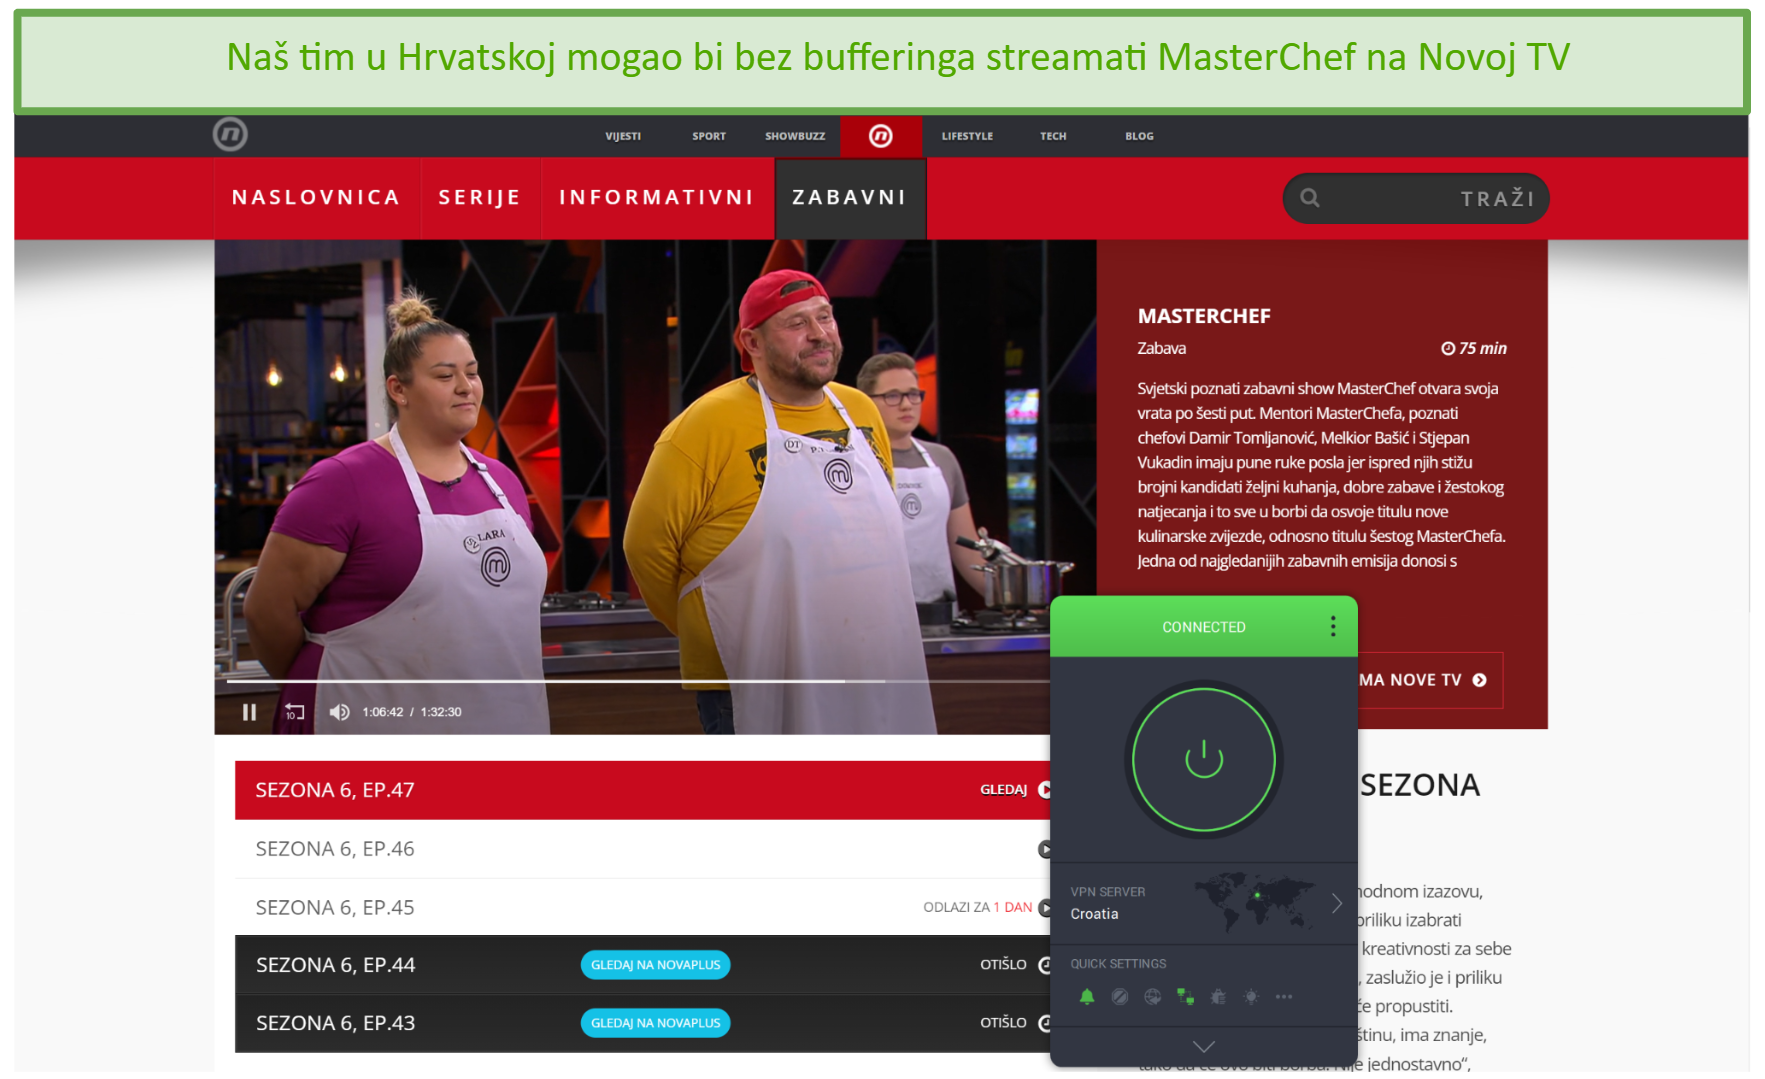 A screenshot showing MasterChef playing on Nova TV while connected to PIA's Croatia server